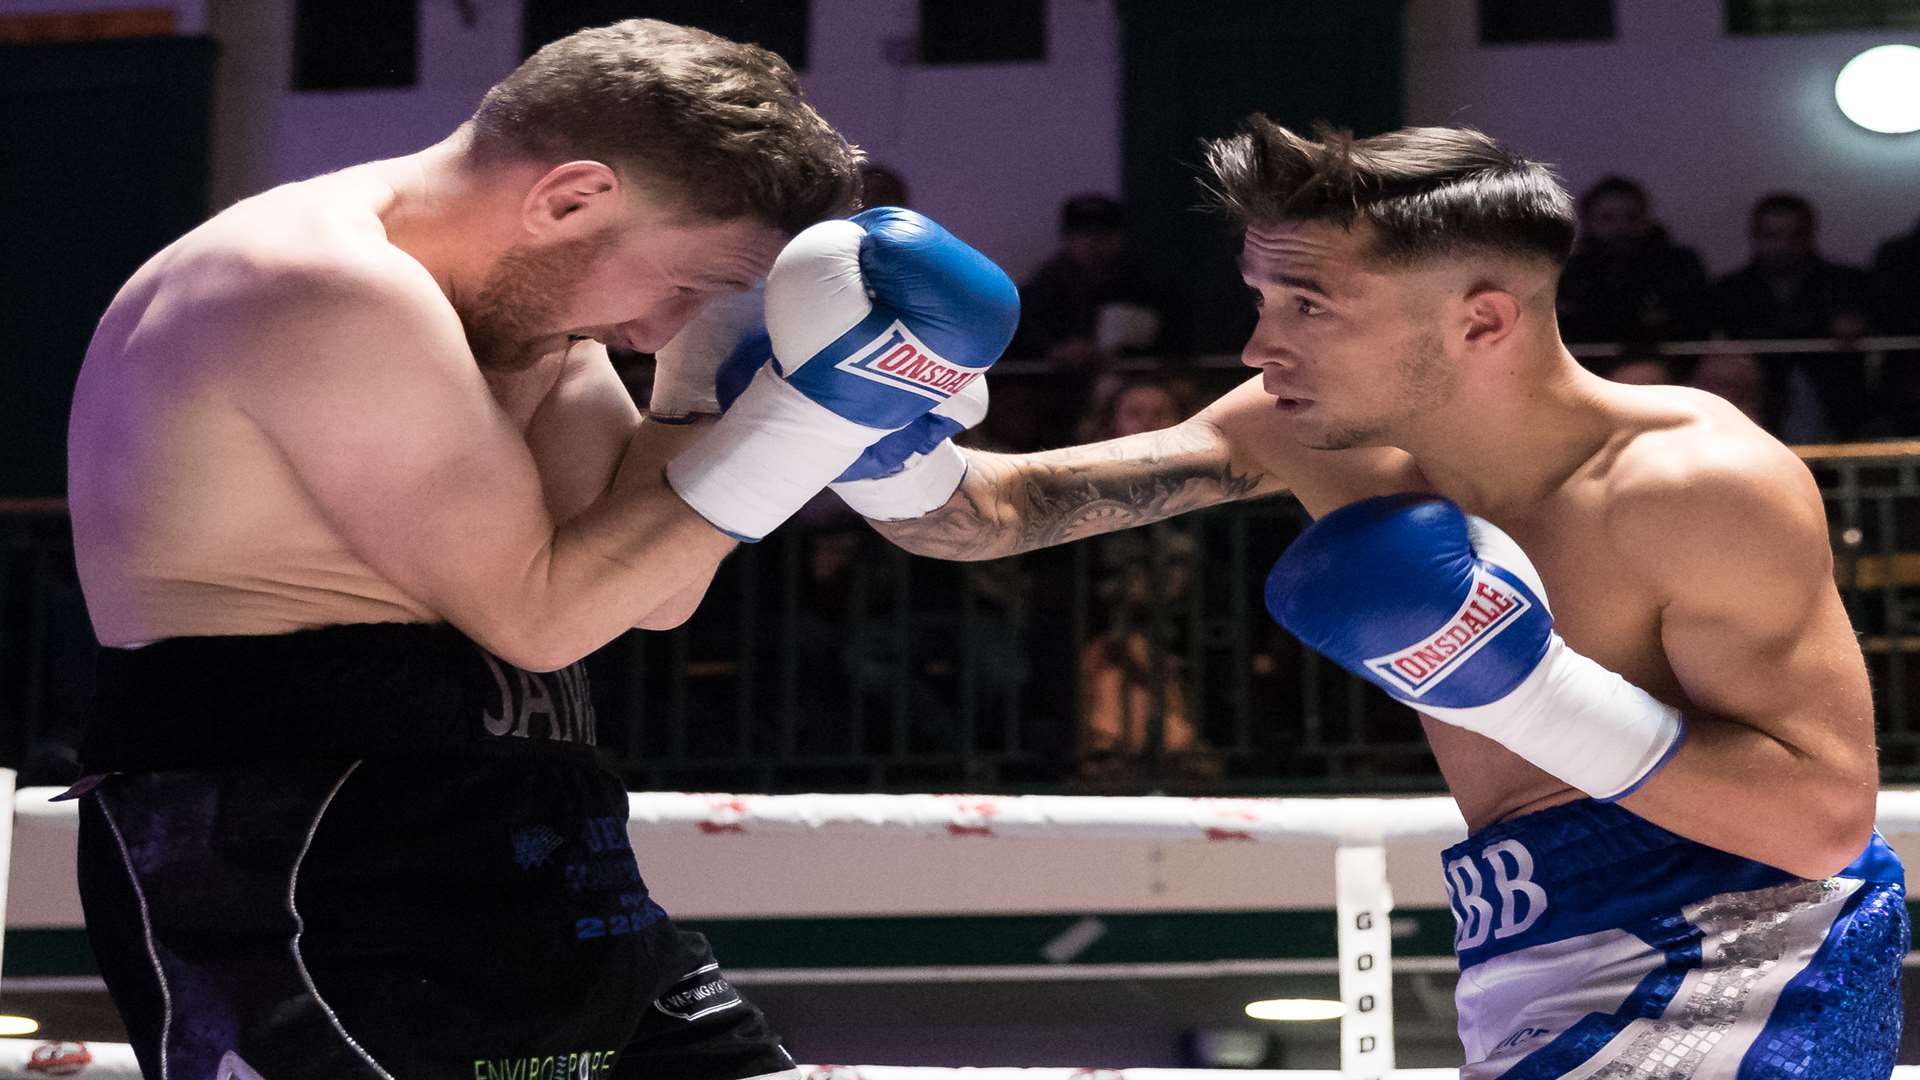 Brandon Ball beat Jamie Speight in his second pro fight Picture: Simon Downing Snr/digitalsportsphoto.com